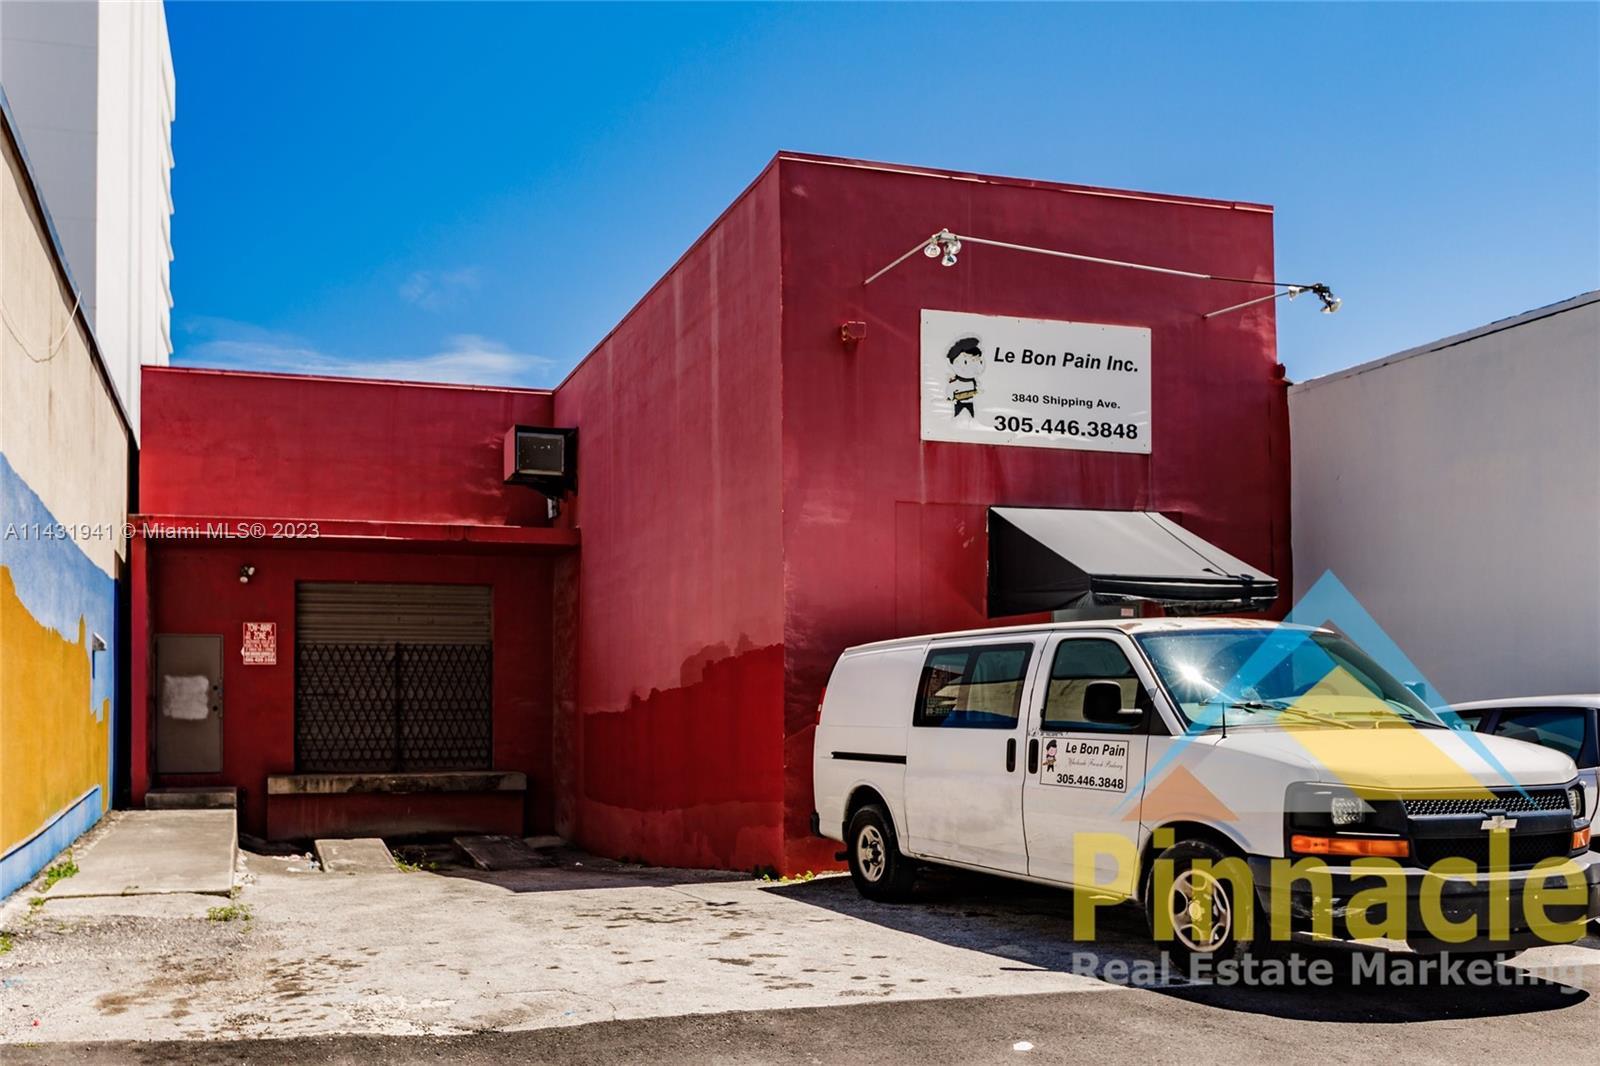 Photo of 3840 Shipping Ave in Miami, FL